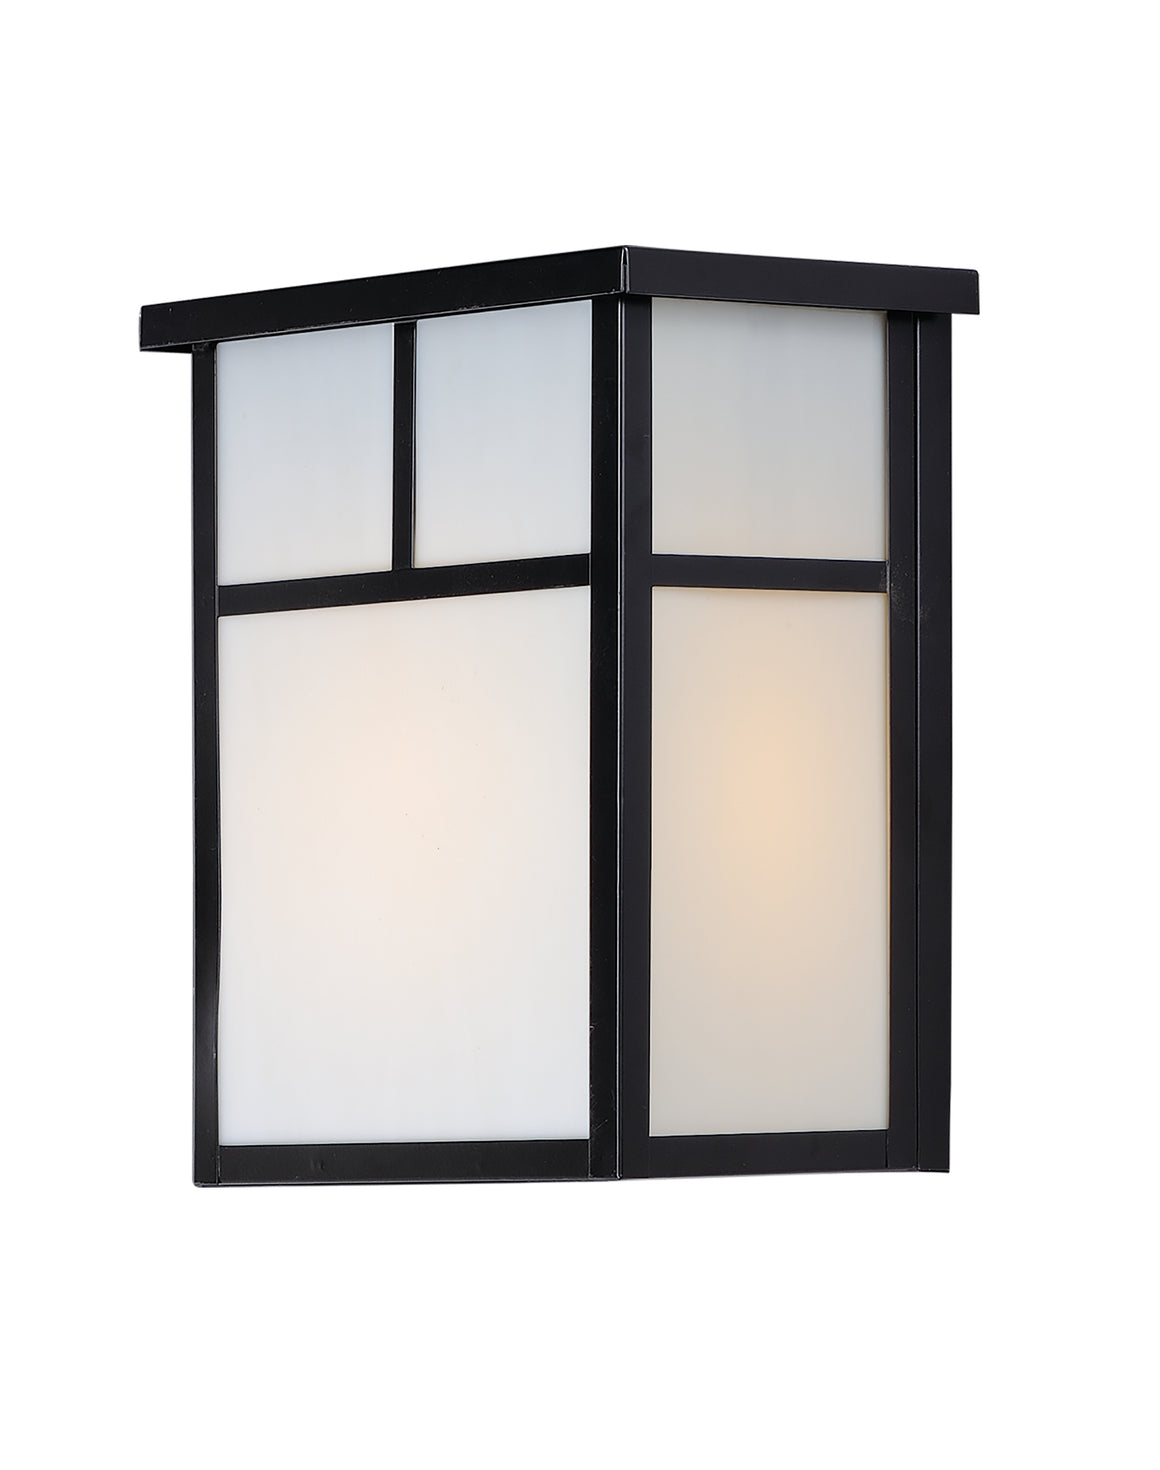 Coldwater 2-Light Outdoor Wall Lantern